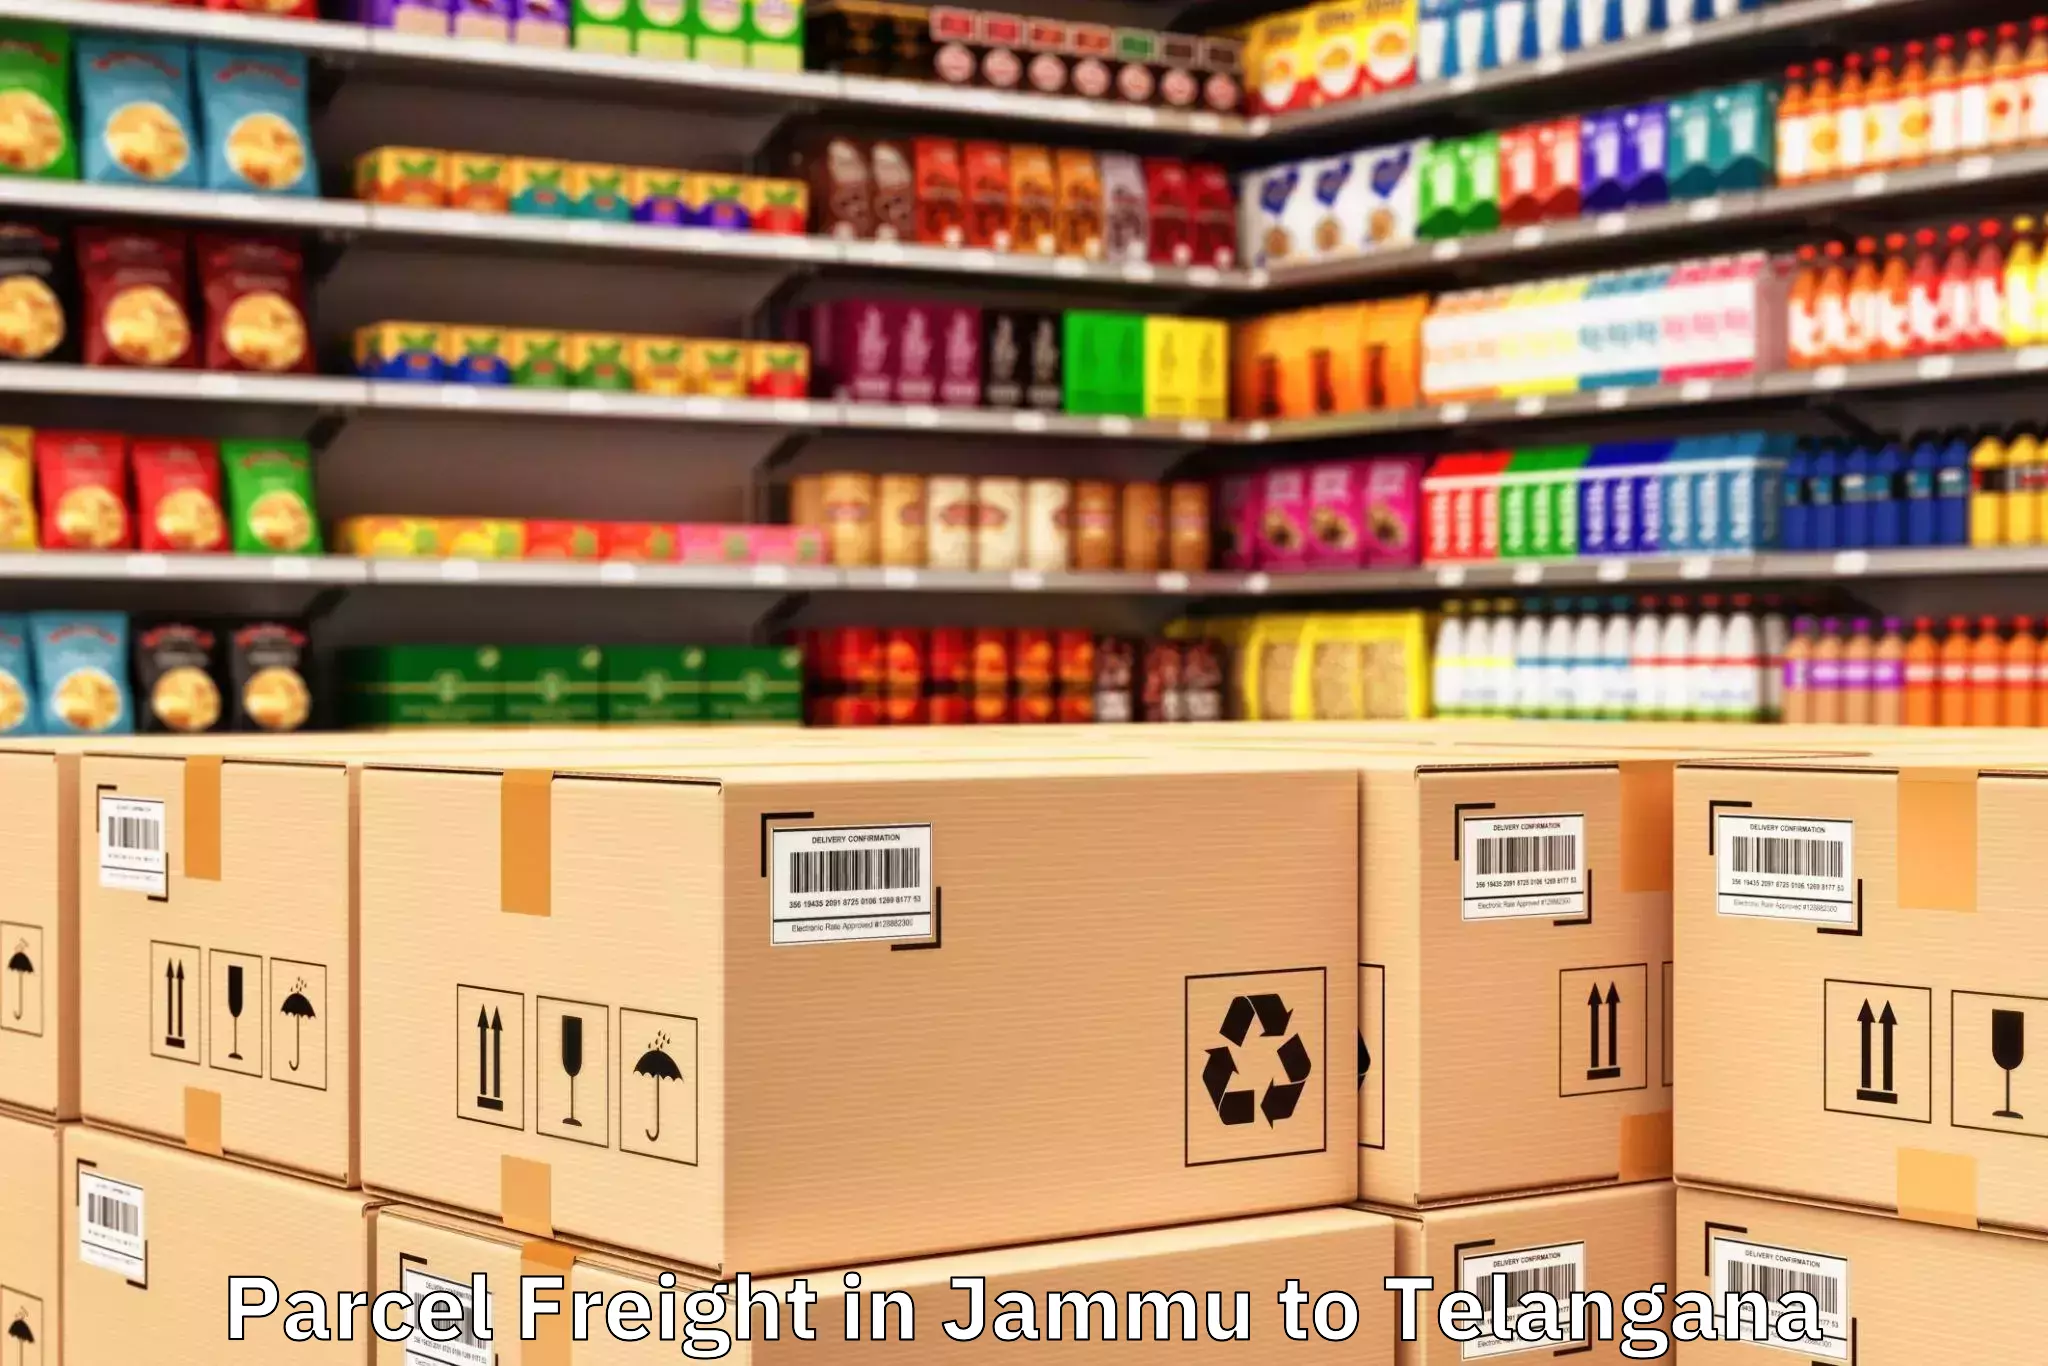 Top Jammu to Shaikpet Parcel Freight Available